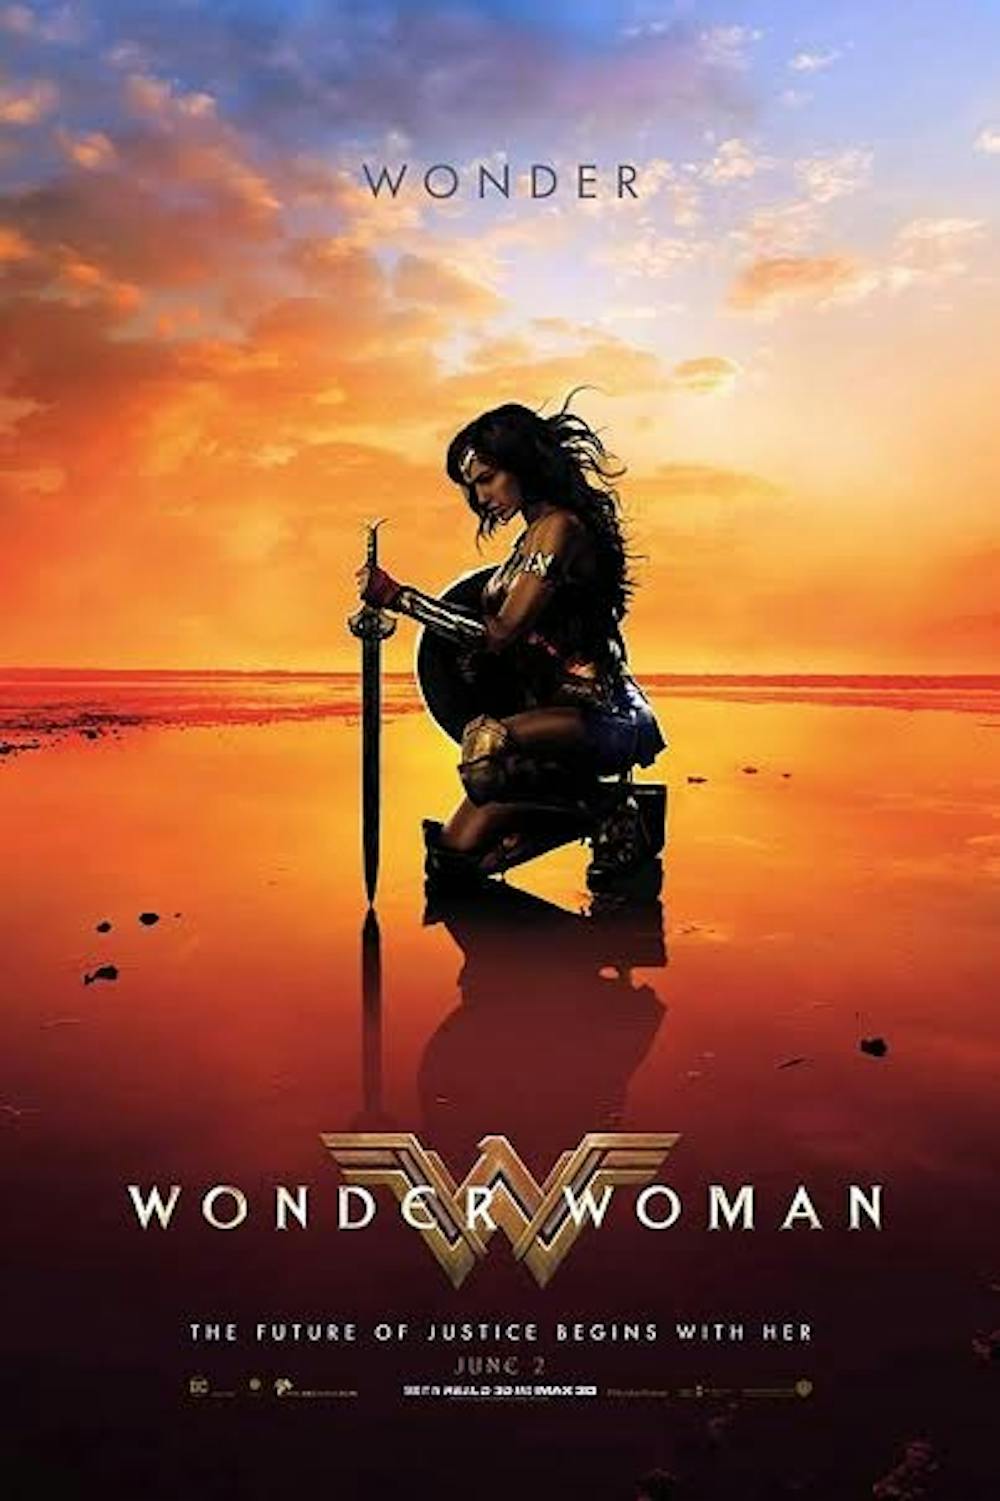 <p>"Wonder Woman," starring Gal Gadot, was&nbsp;released on June 2, 2017. The film is DC's first successful entry into their cinematic universe, ditching the grim tone in favor of humor and heart.</p>